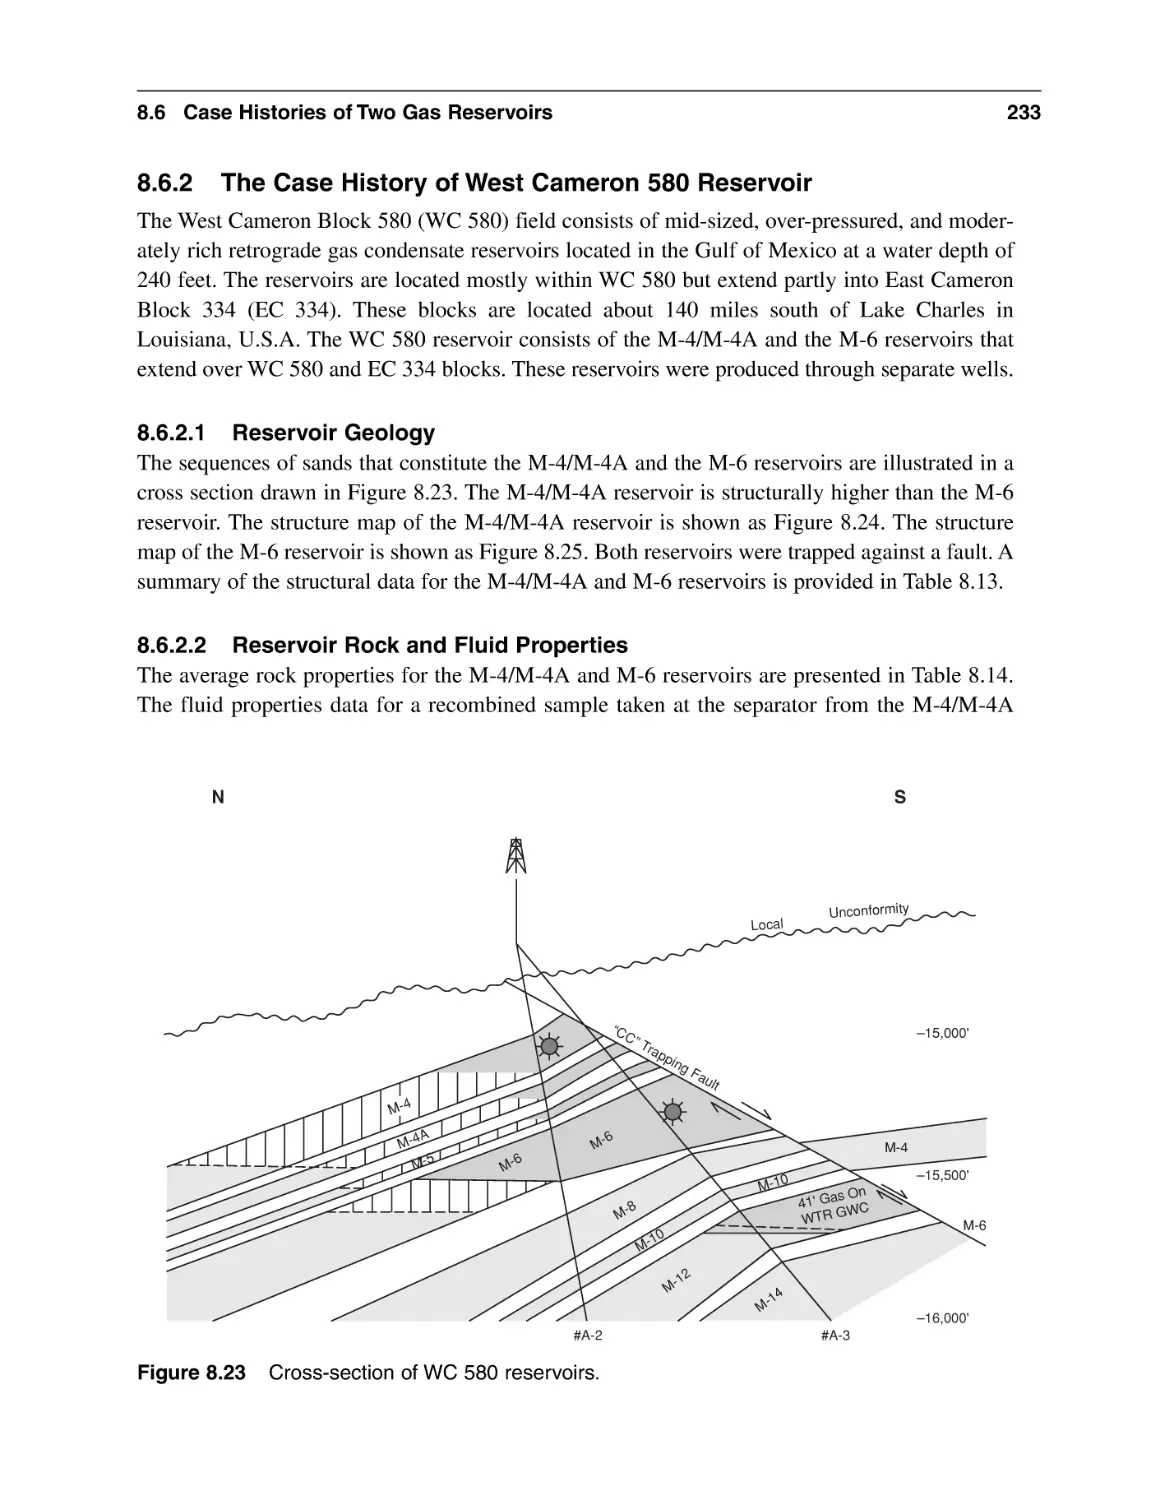 8.6.2 The Case History of West Cameron 580 Reservoir